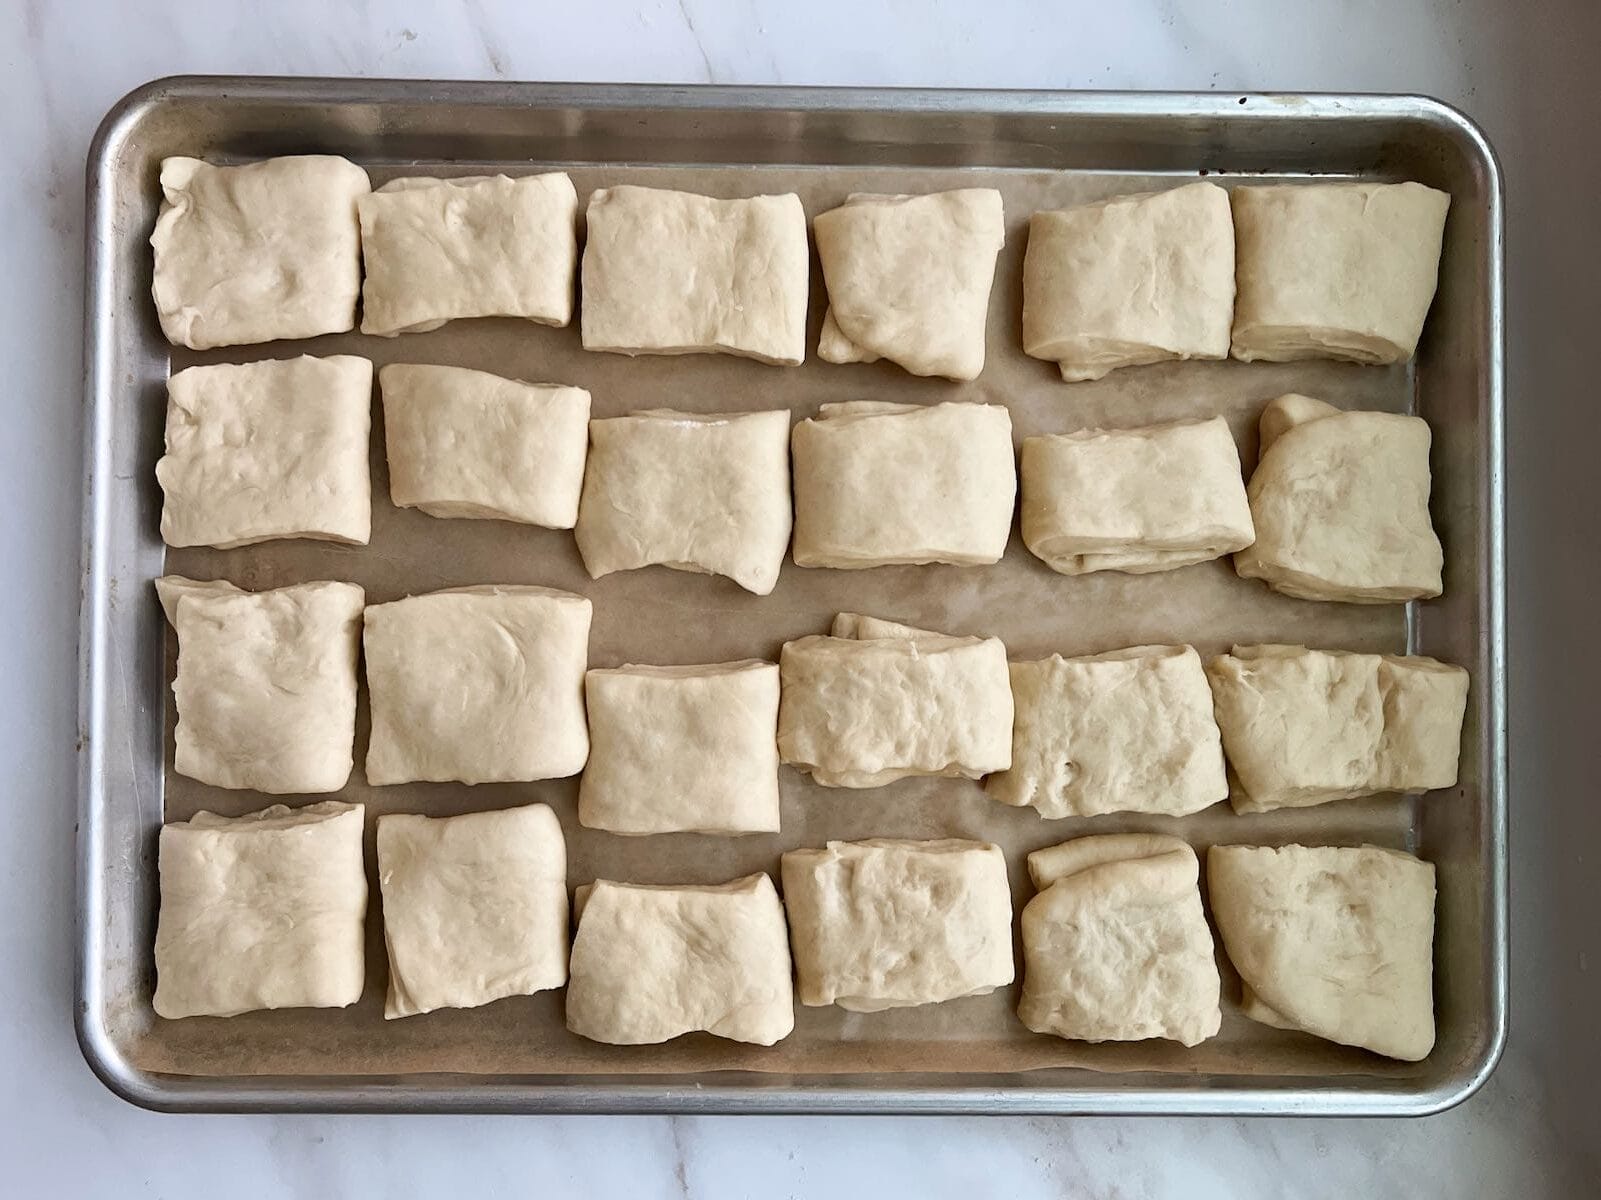 Full pan of Parker House Rolls rising in a baking sheet.